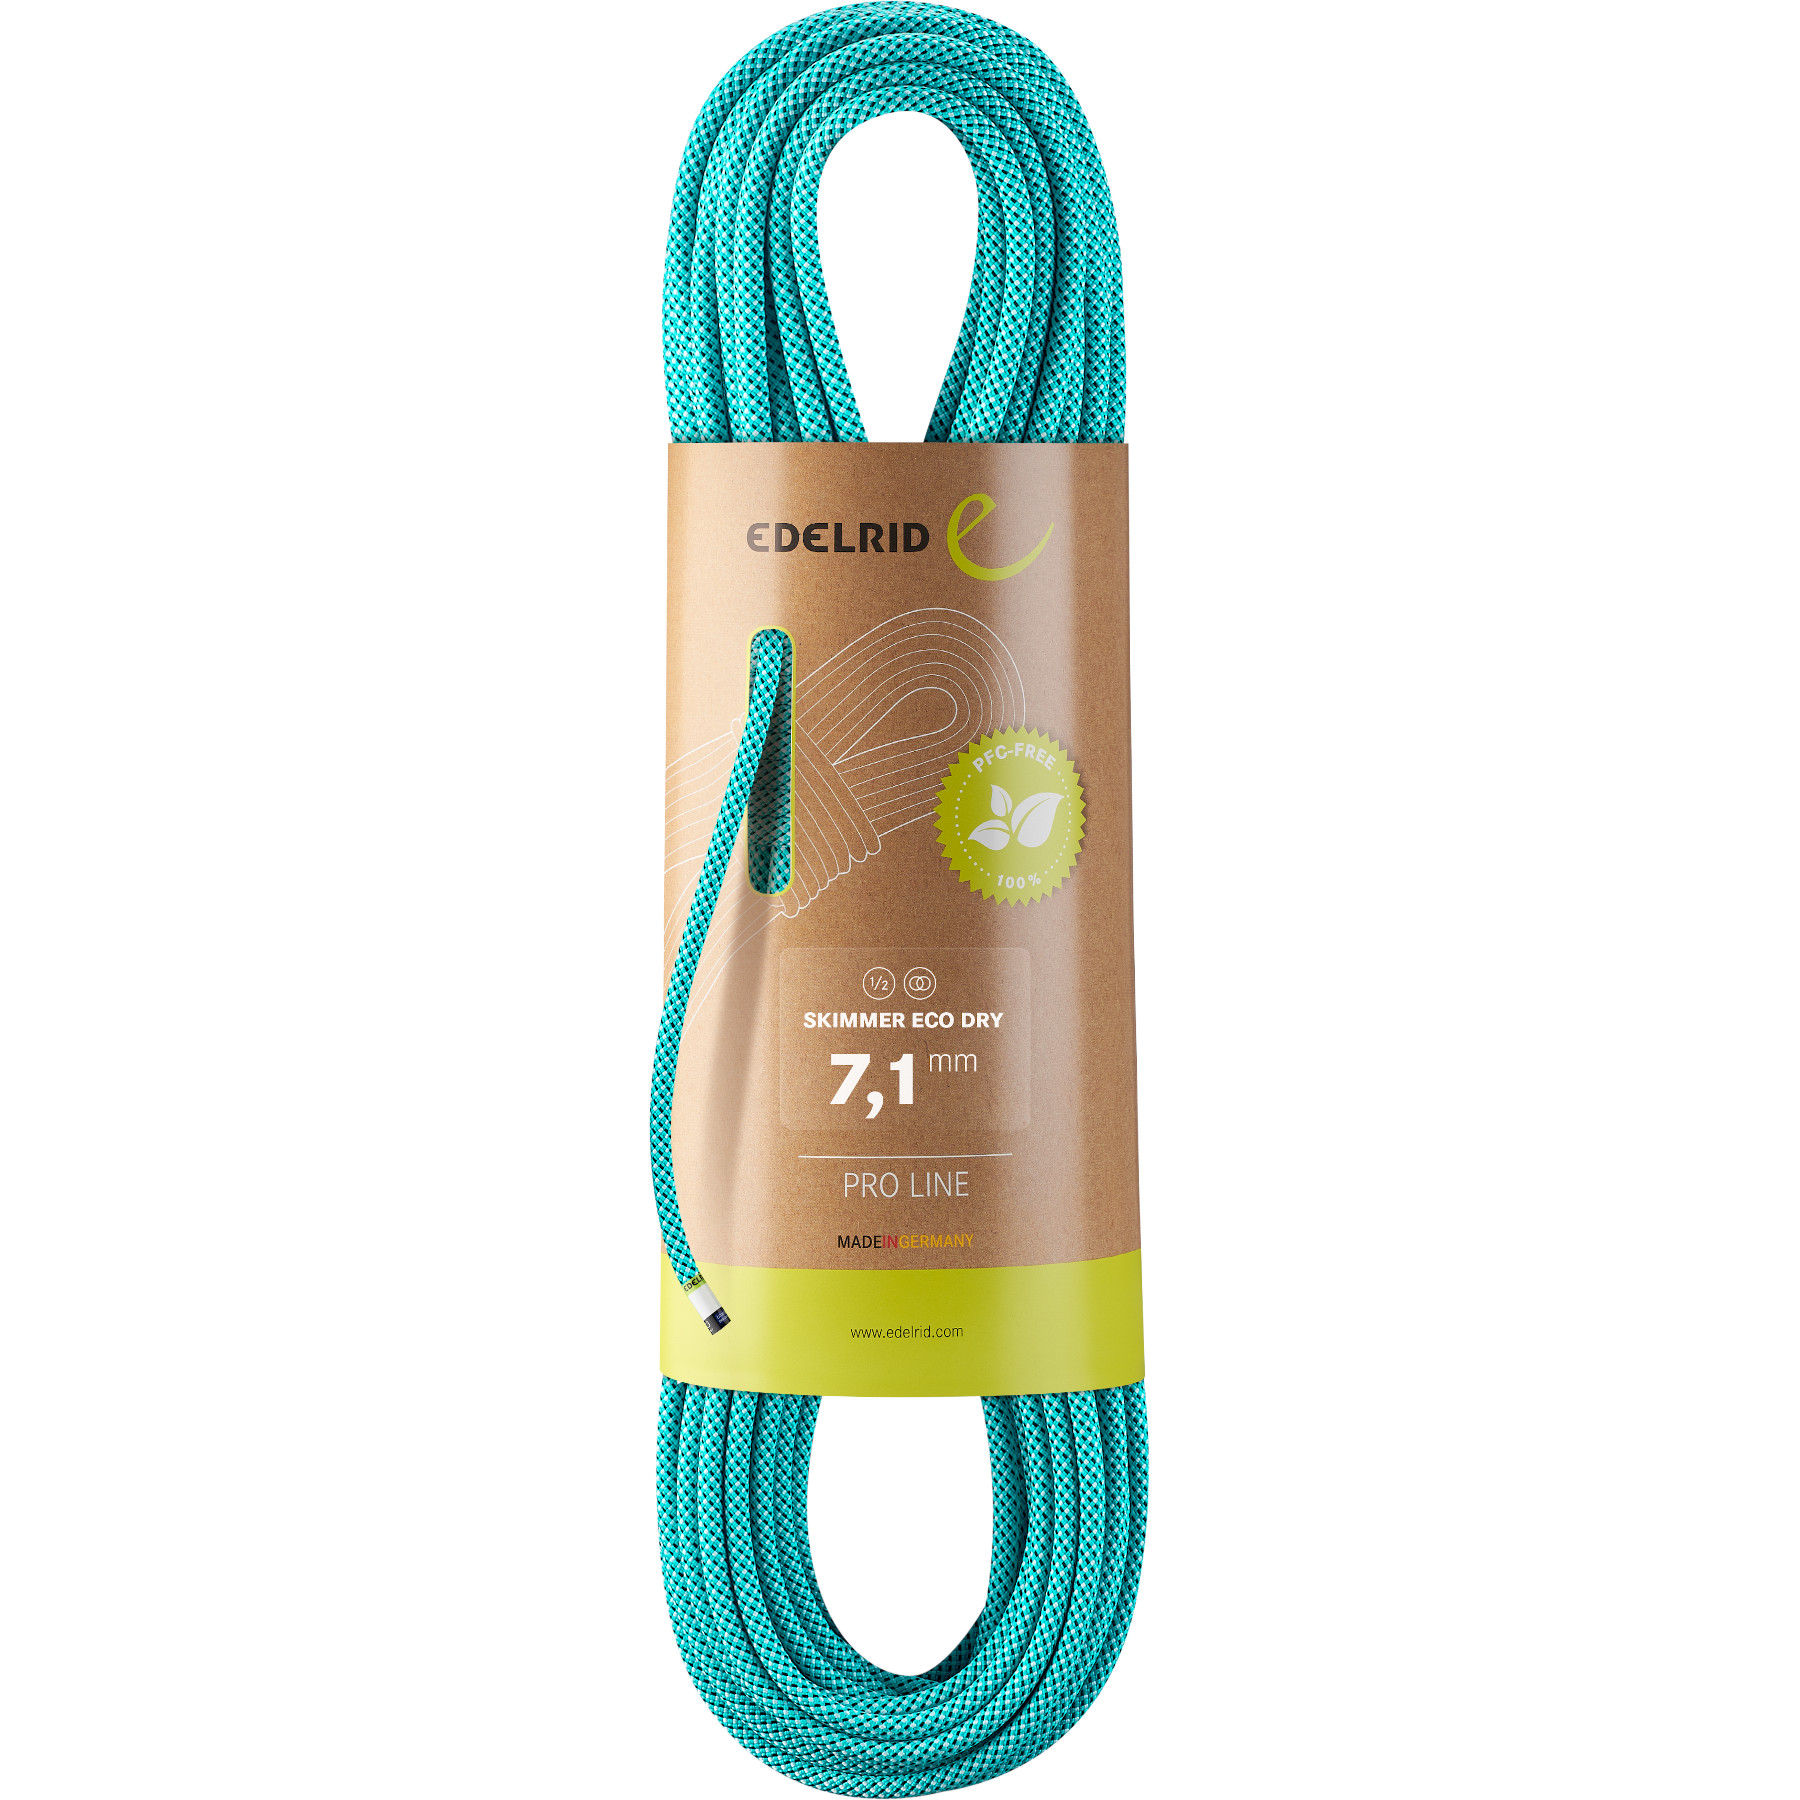 Image of Edelrid Skimmer Eco Dry 7,1mm Rope - 60m - icemint